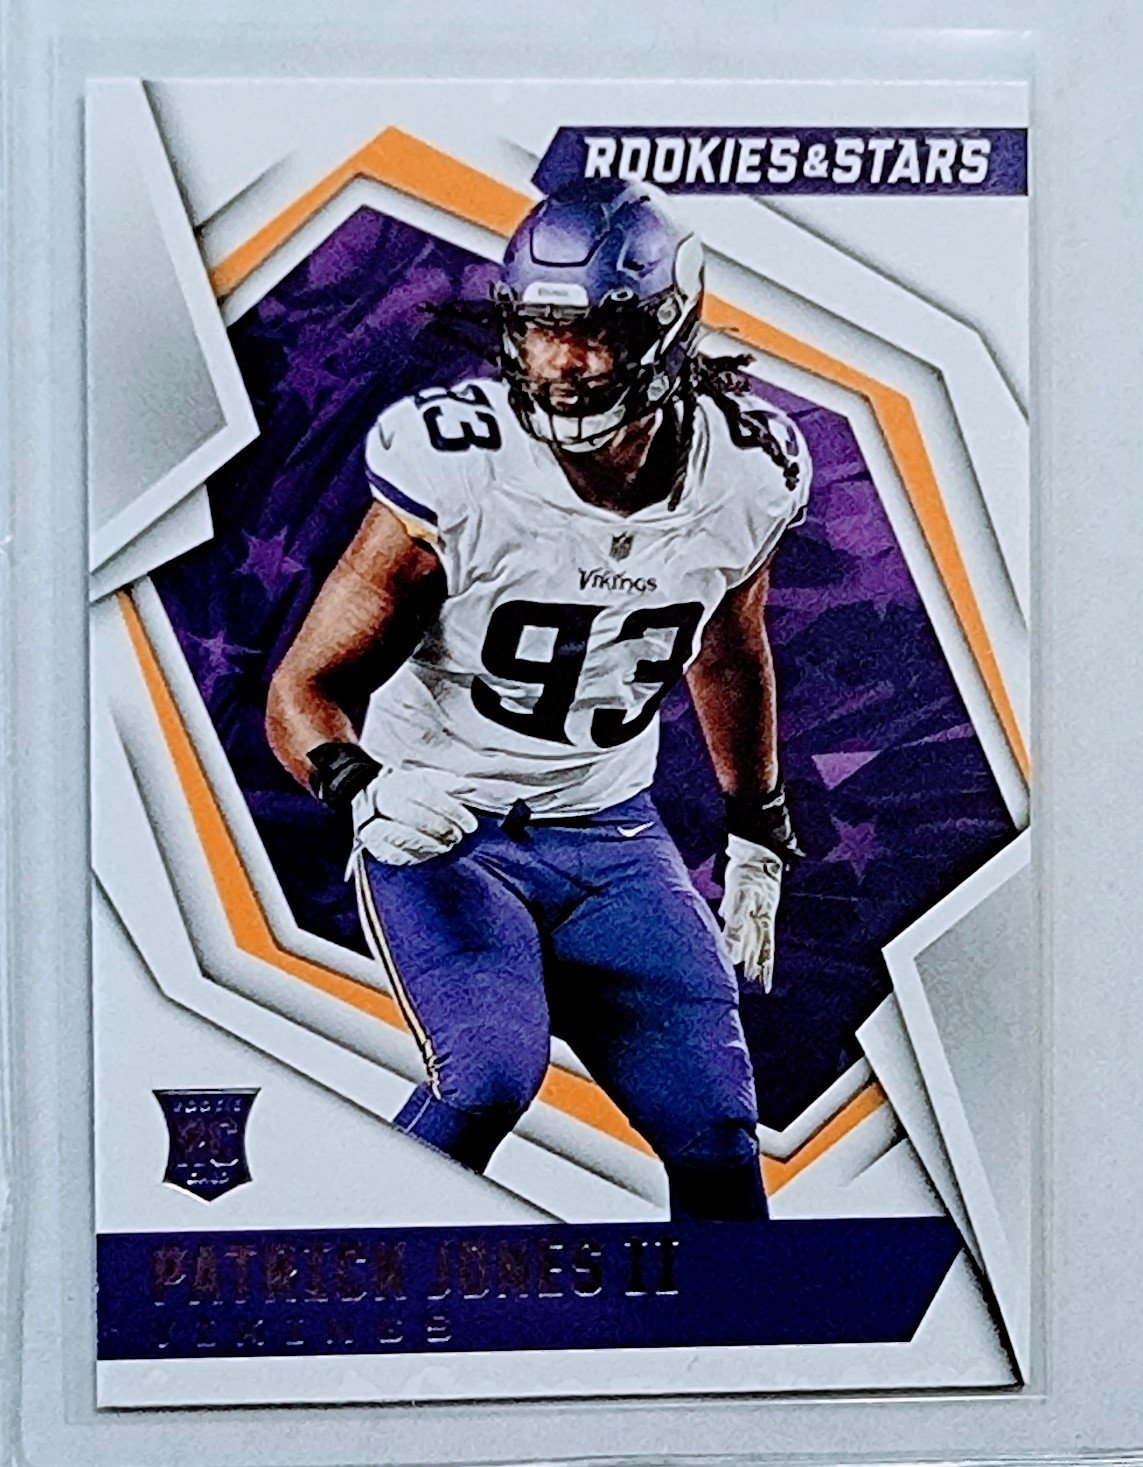 2021 Panini Rookies and Stars Patrick Jones II Rookie Football Card AVM1 simple Xclusive Collectibles   